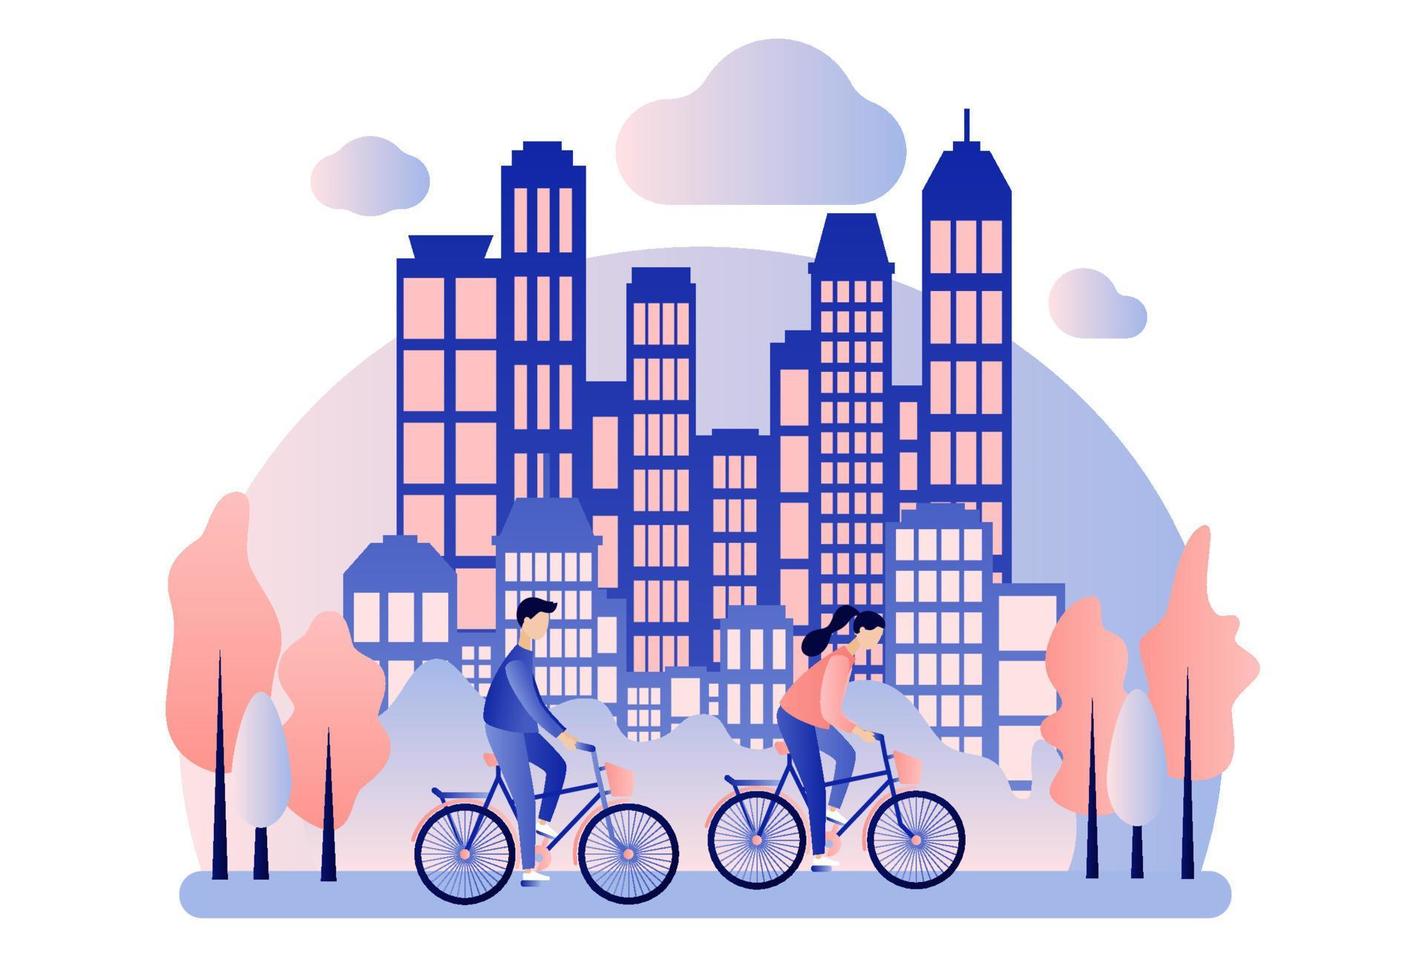 Bike rental. Background the city with skyscrapers. Flat cartoon style. Vector illustration